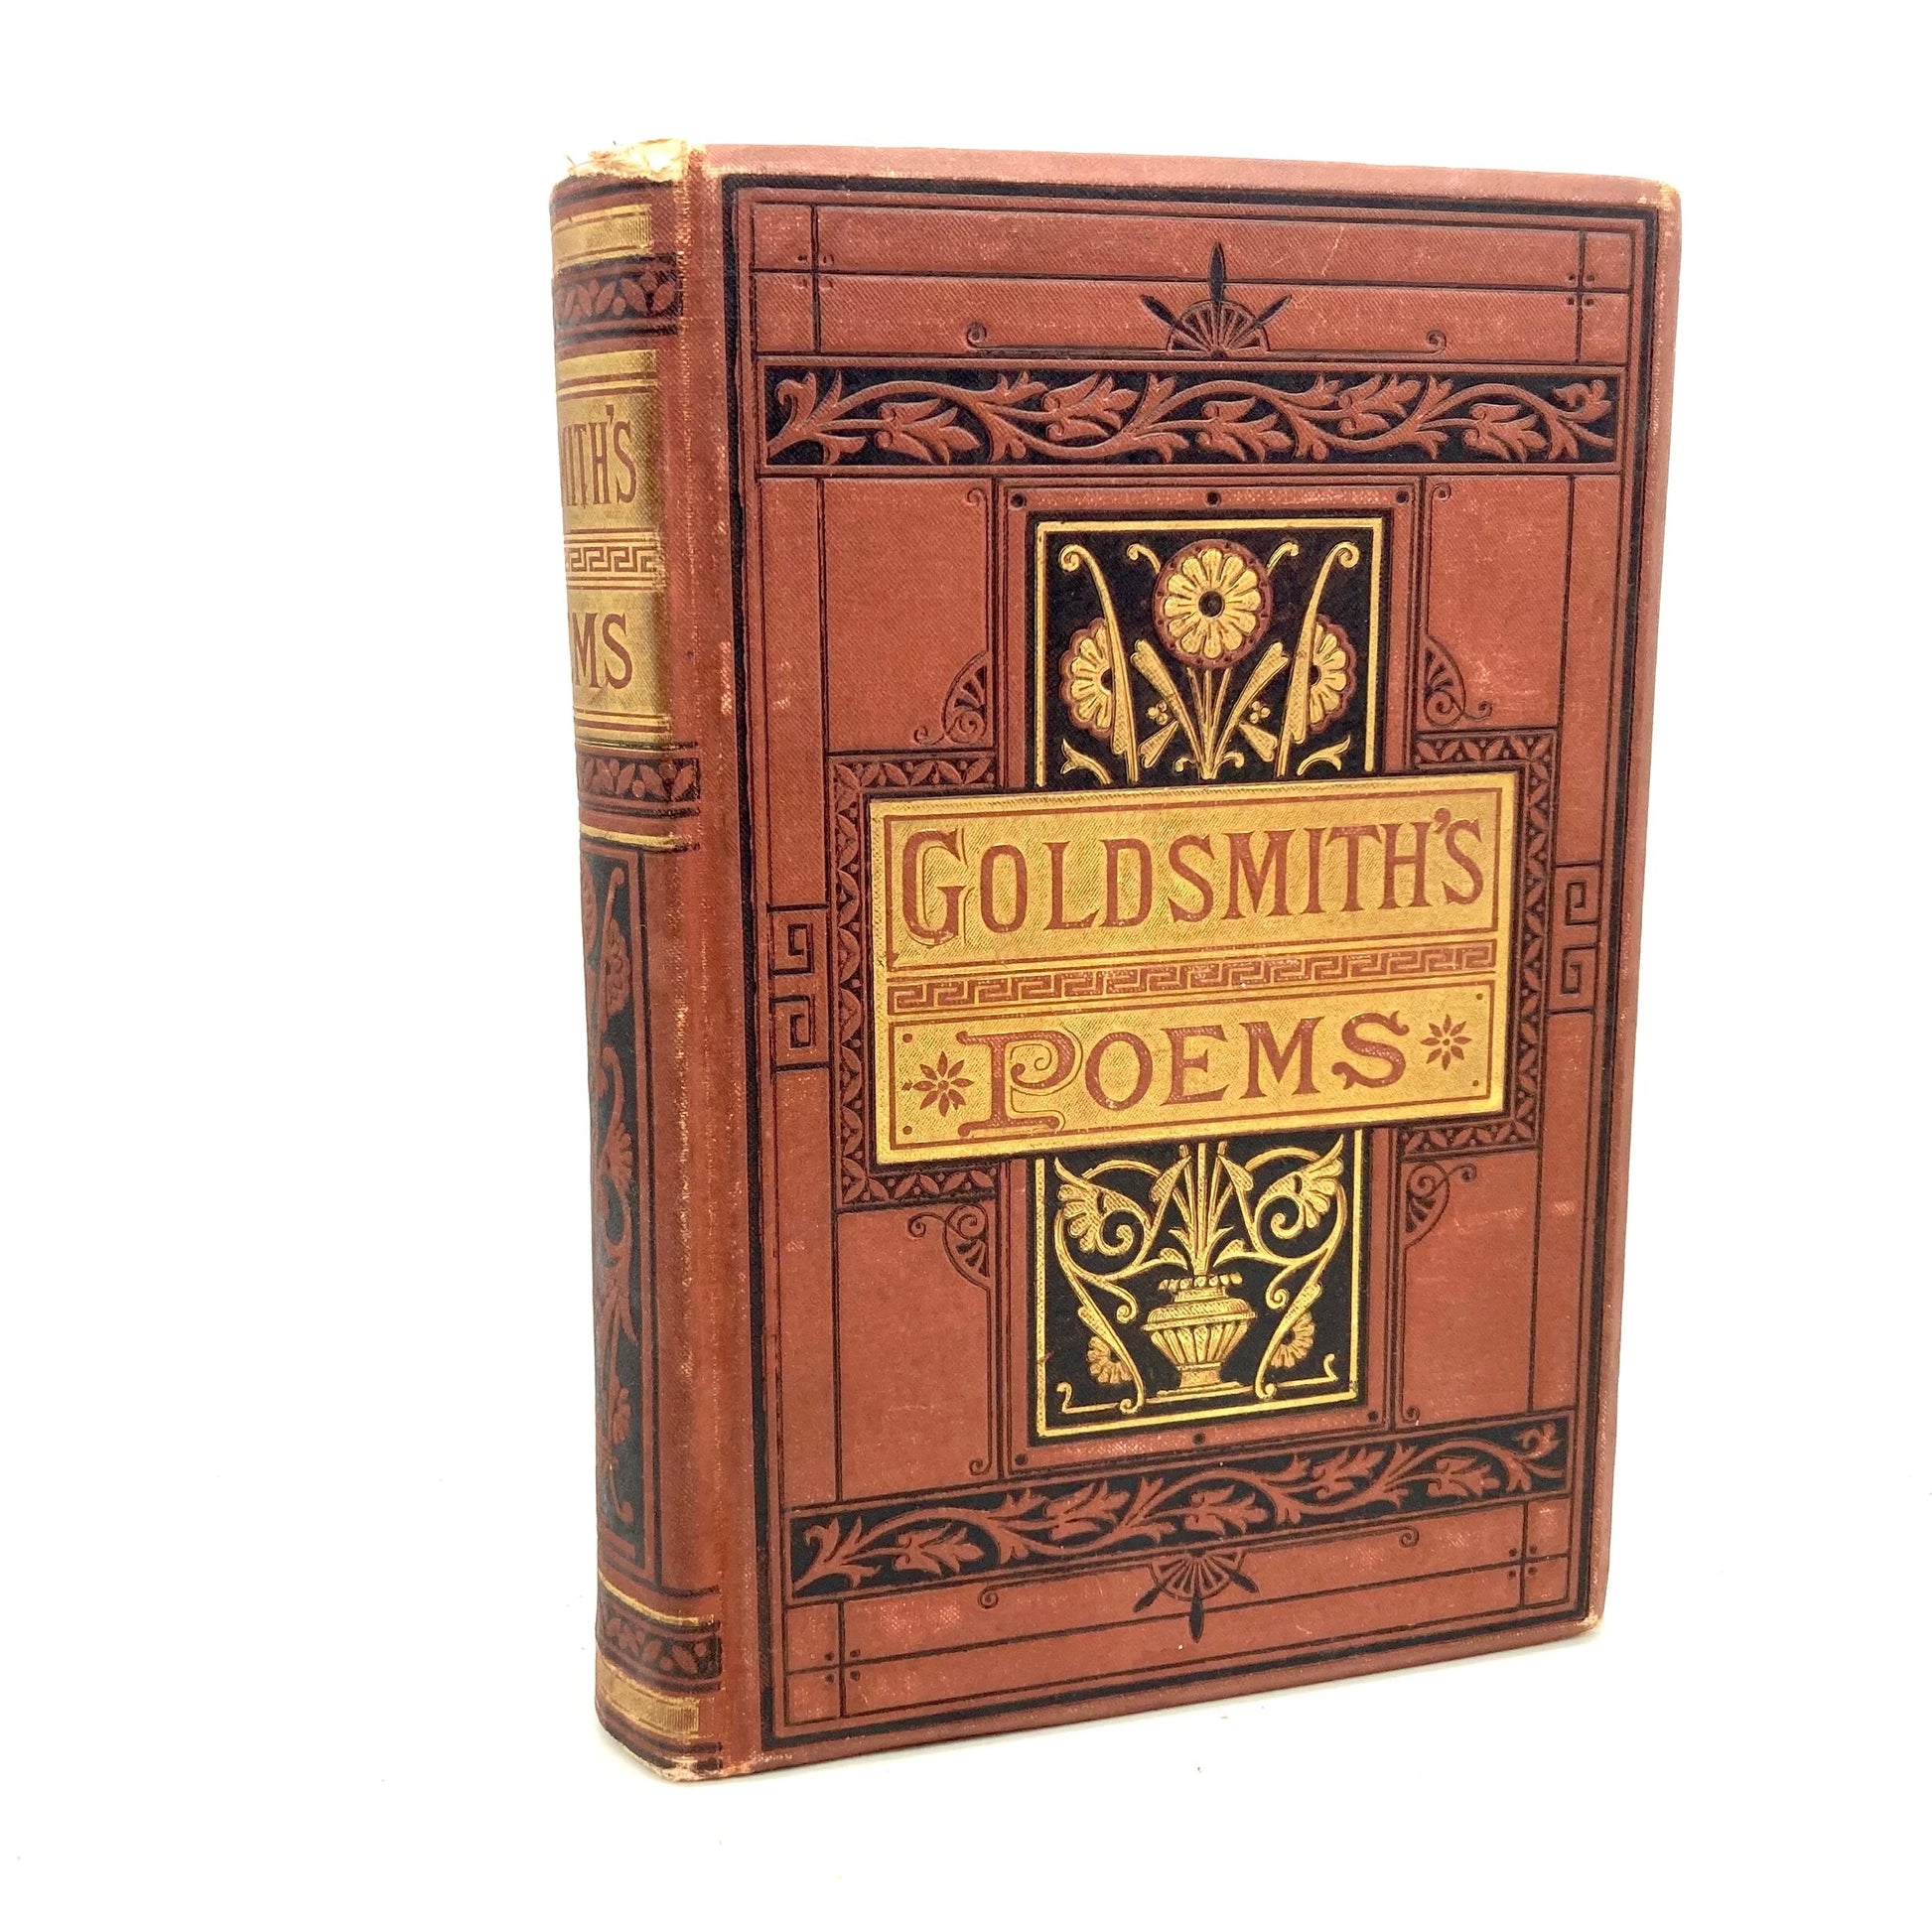 GOLDSMITH, Oliver "Poems, Plays, and Essays" [T.Y. Crowell, c1880s] - Buzz Bookstore